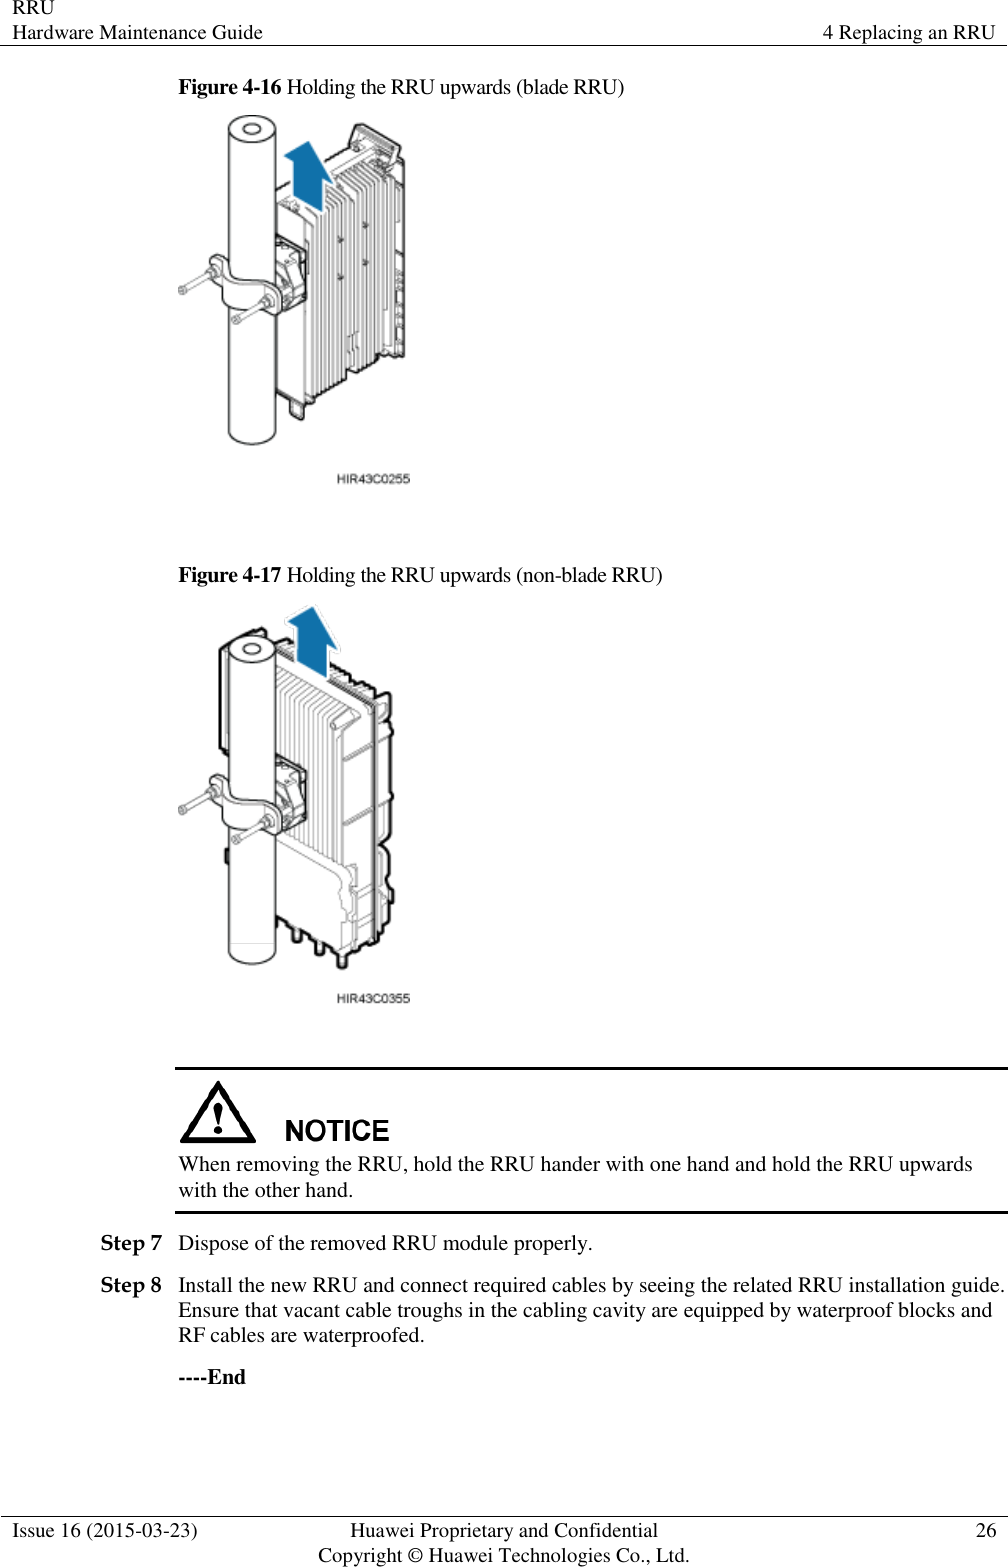 RRU Hardware Maintenance Guide 4 Replacing an RRU  Issue 16 (2015-03-23) Huawei Proprietary and Confidential                                     Copyright © Huawei Technologies Co., Ltd. 26  Figure 4-16 Holding the RRU upwards (blade RRU)   Figure 4-17 Holding the RRU upwards (non-blade RRU)    When removing the RRU, hold the RRU hander with one hand and hold the RRU upwards with the other hand. Step 7 Dispose of the removed RRU module properly. Step 8 Install the new RRU and connect required cables by seeing the related RRU installation guide. Ensure that vacant cable troughs in the cabling cavity are equipped by waterproof blocks and RF cables are waterproofed. ----End 